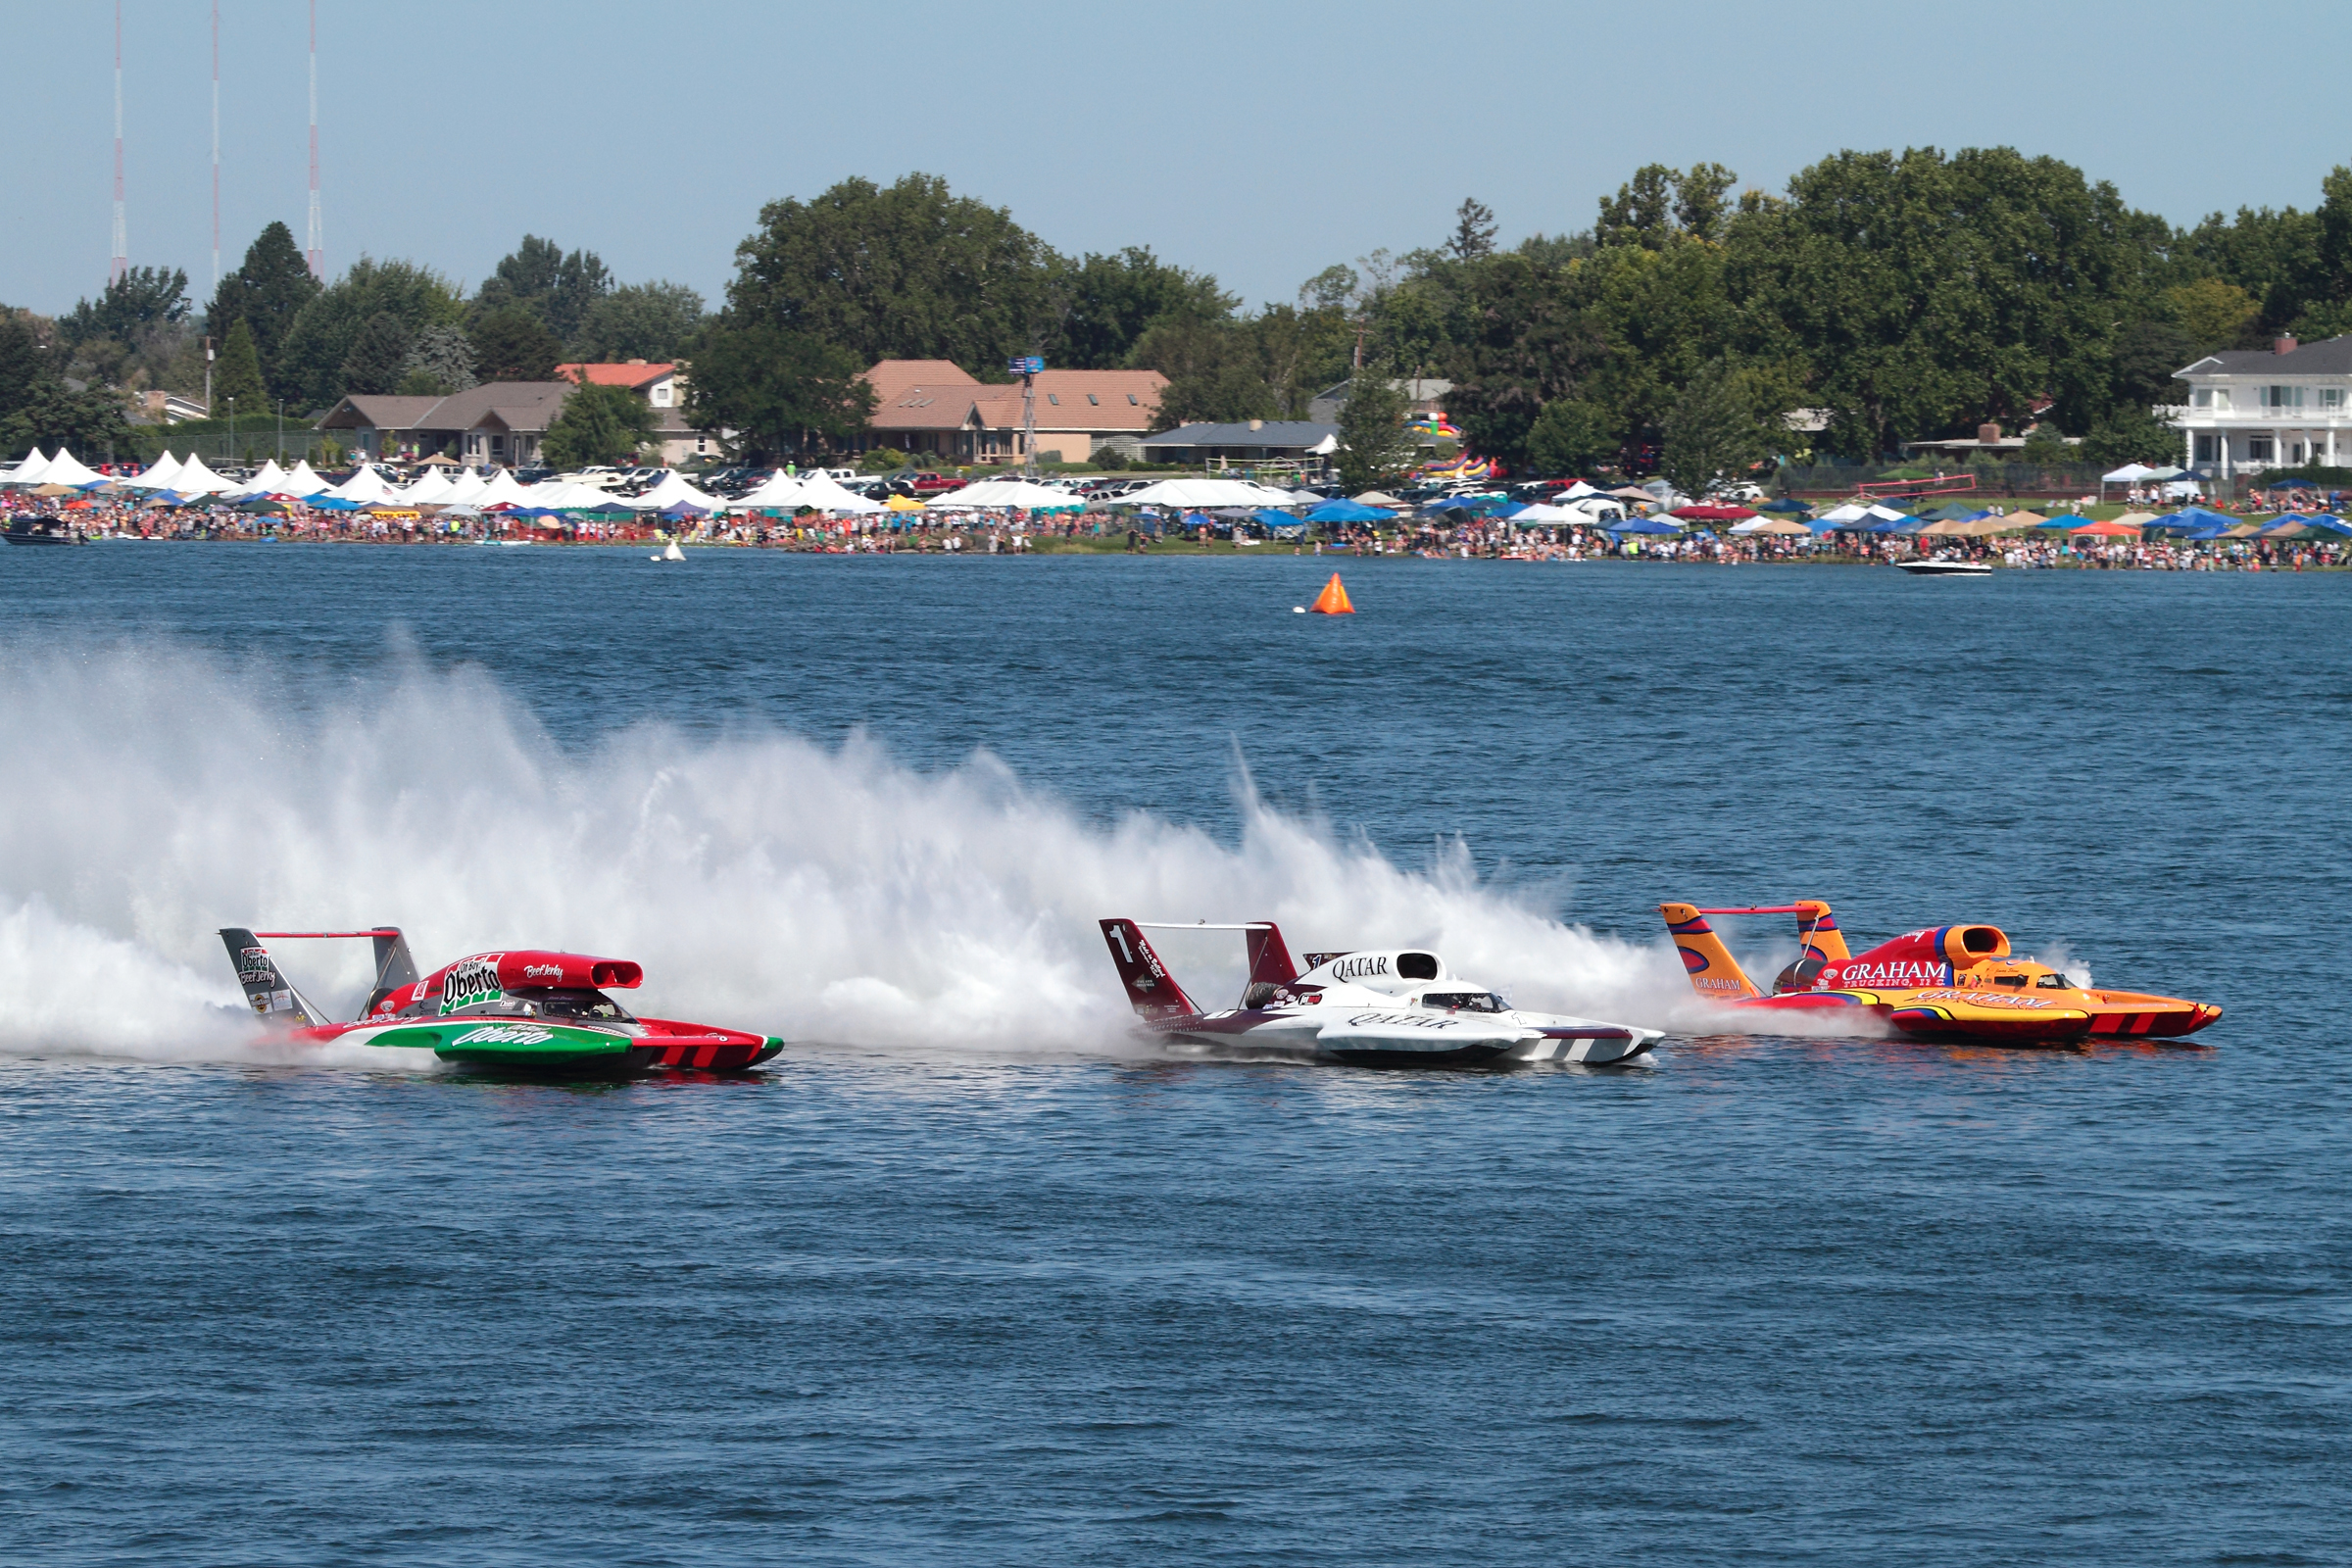 unlimited hydroplane, Race, Racing, Jet, Hydroplane, Boat, Ship, Hot, Rod, Rods, Yr Wallpaper